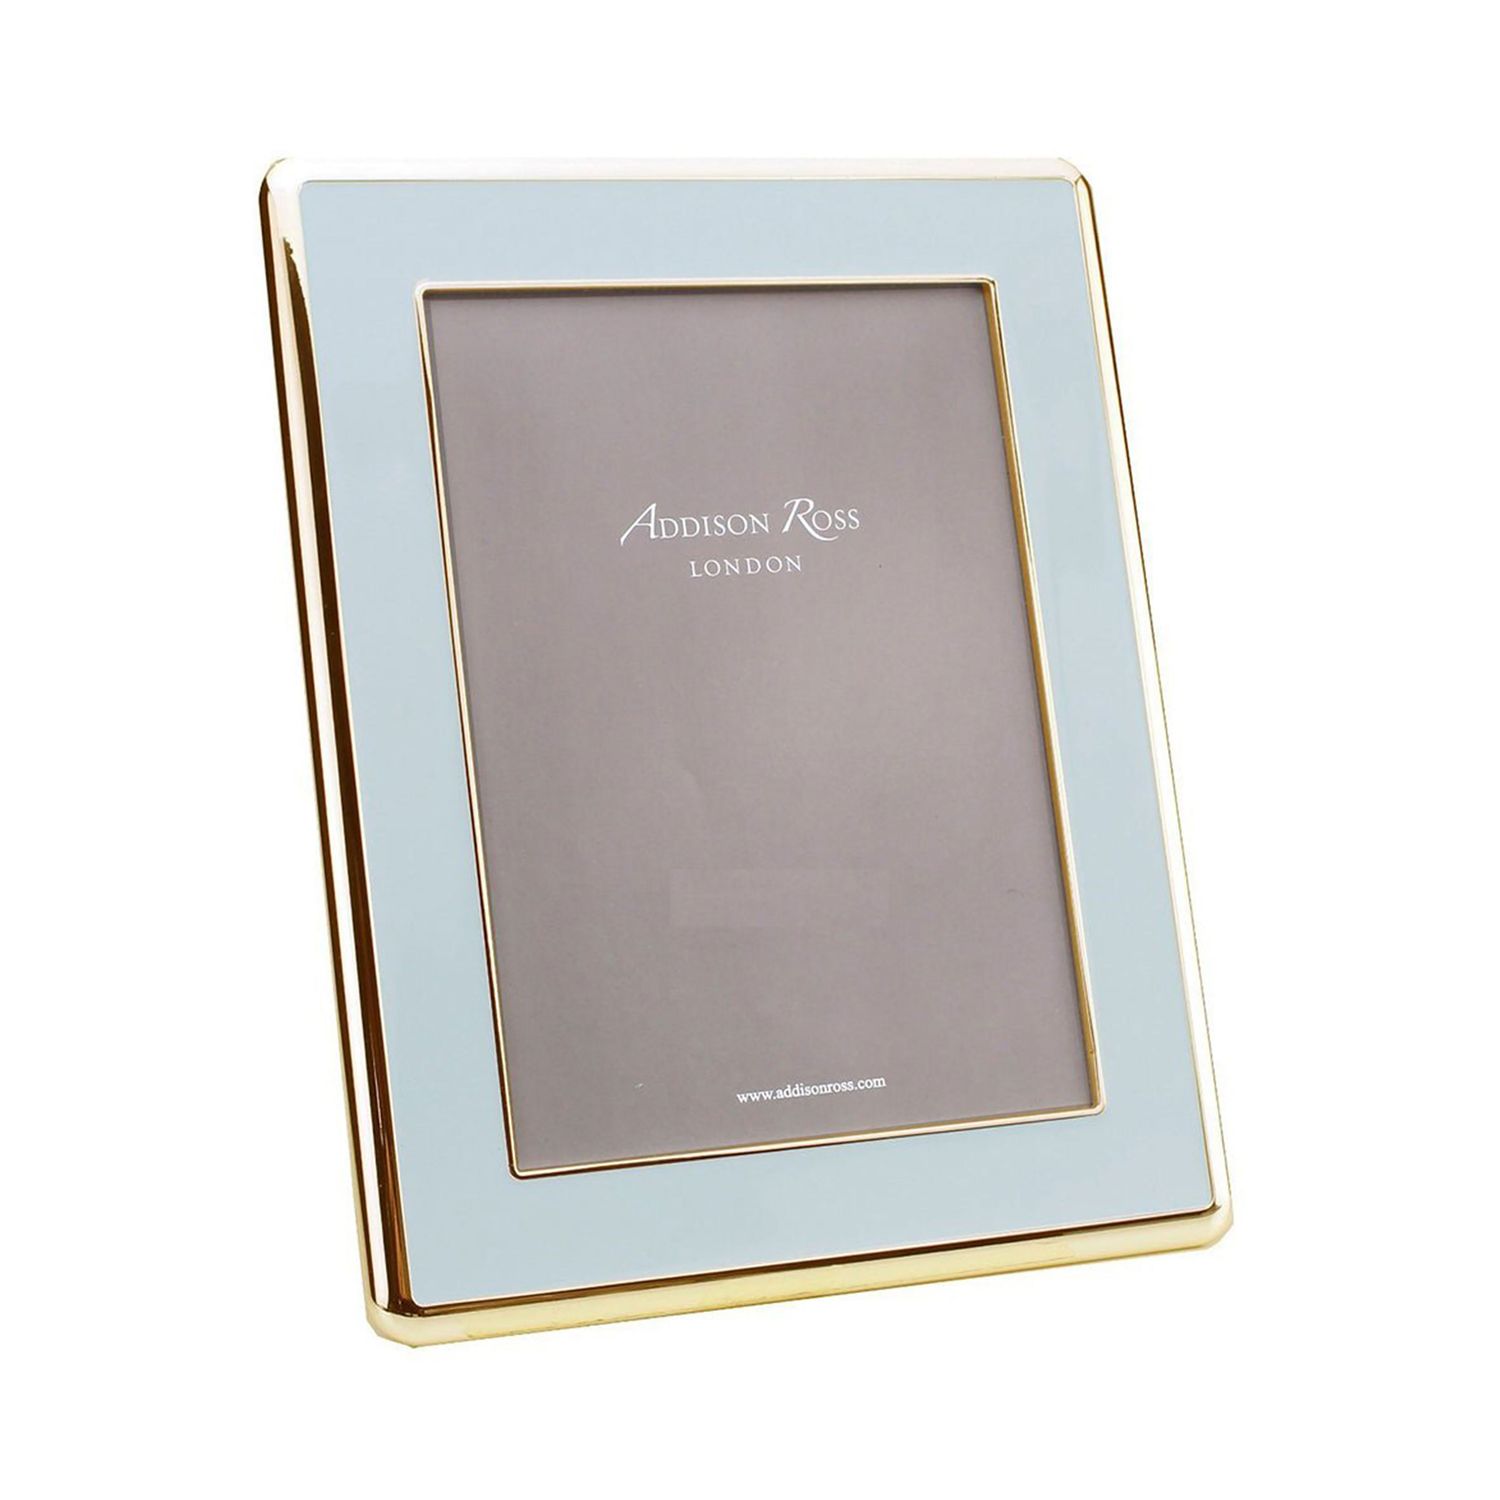 Addison Ross 4 x 6 Inch Picture Frame 30mm Gold &amp; Powder Blue FR6517